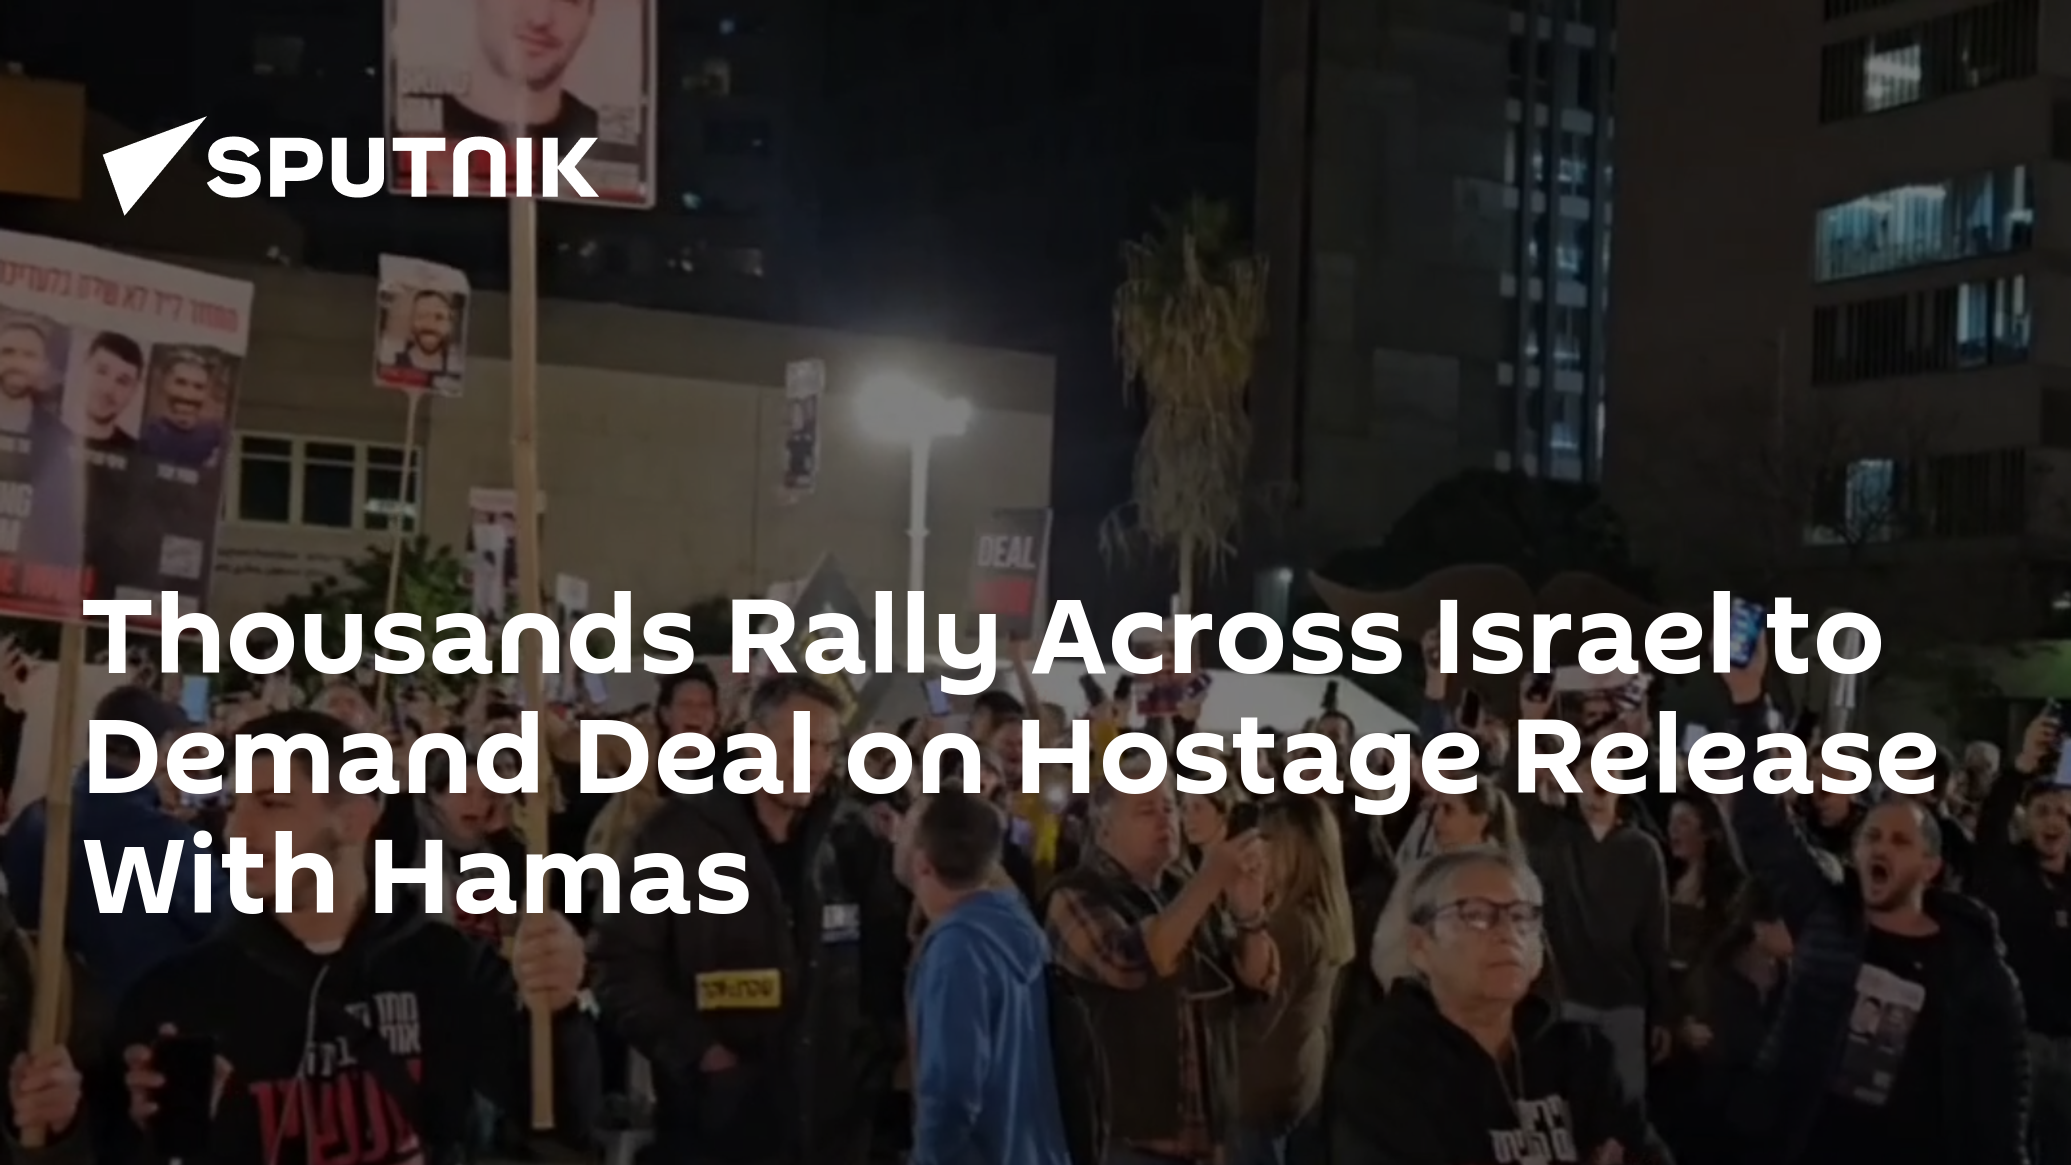 Thousands Rally Across Israel to Demand Deal on Hostage Release With Hamas